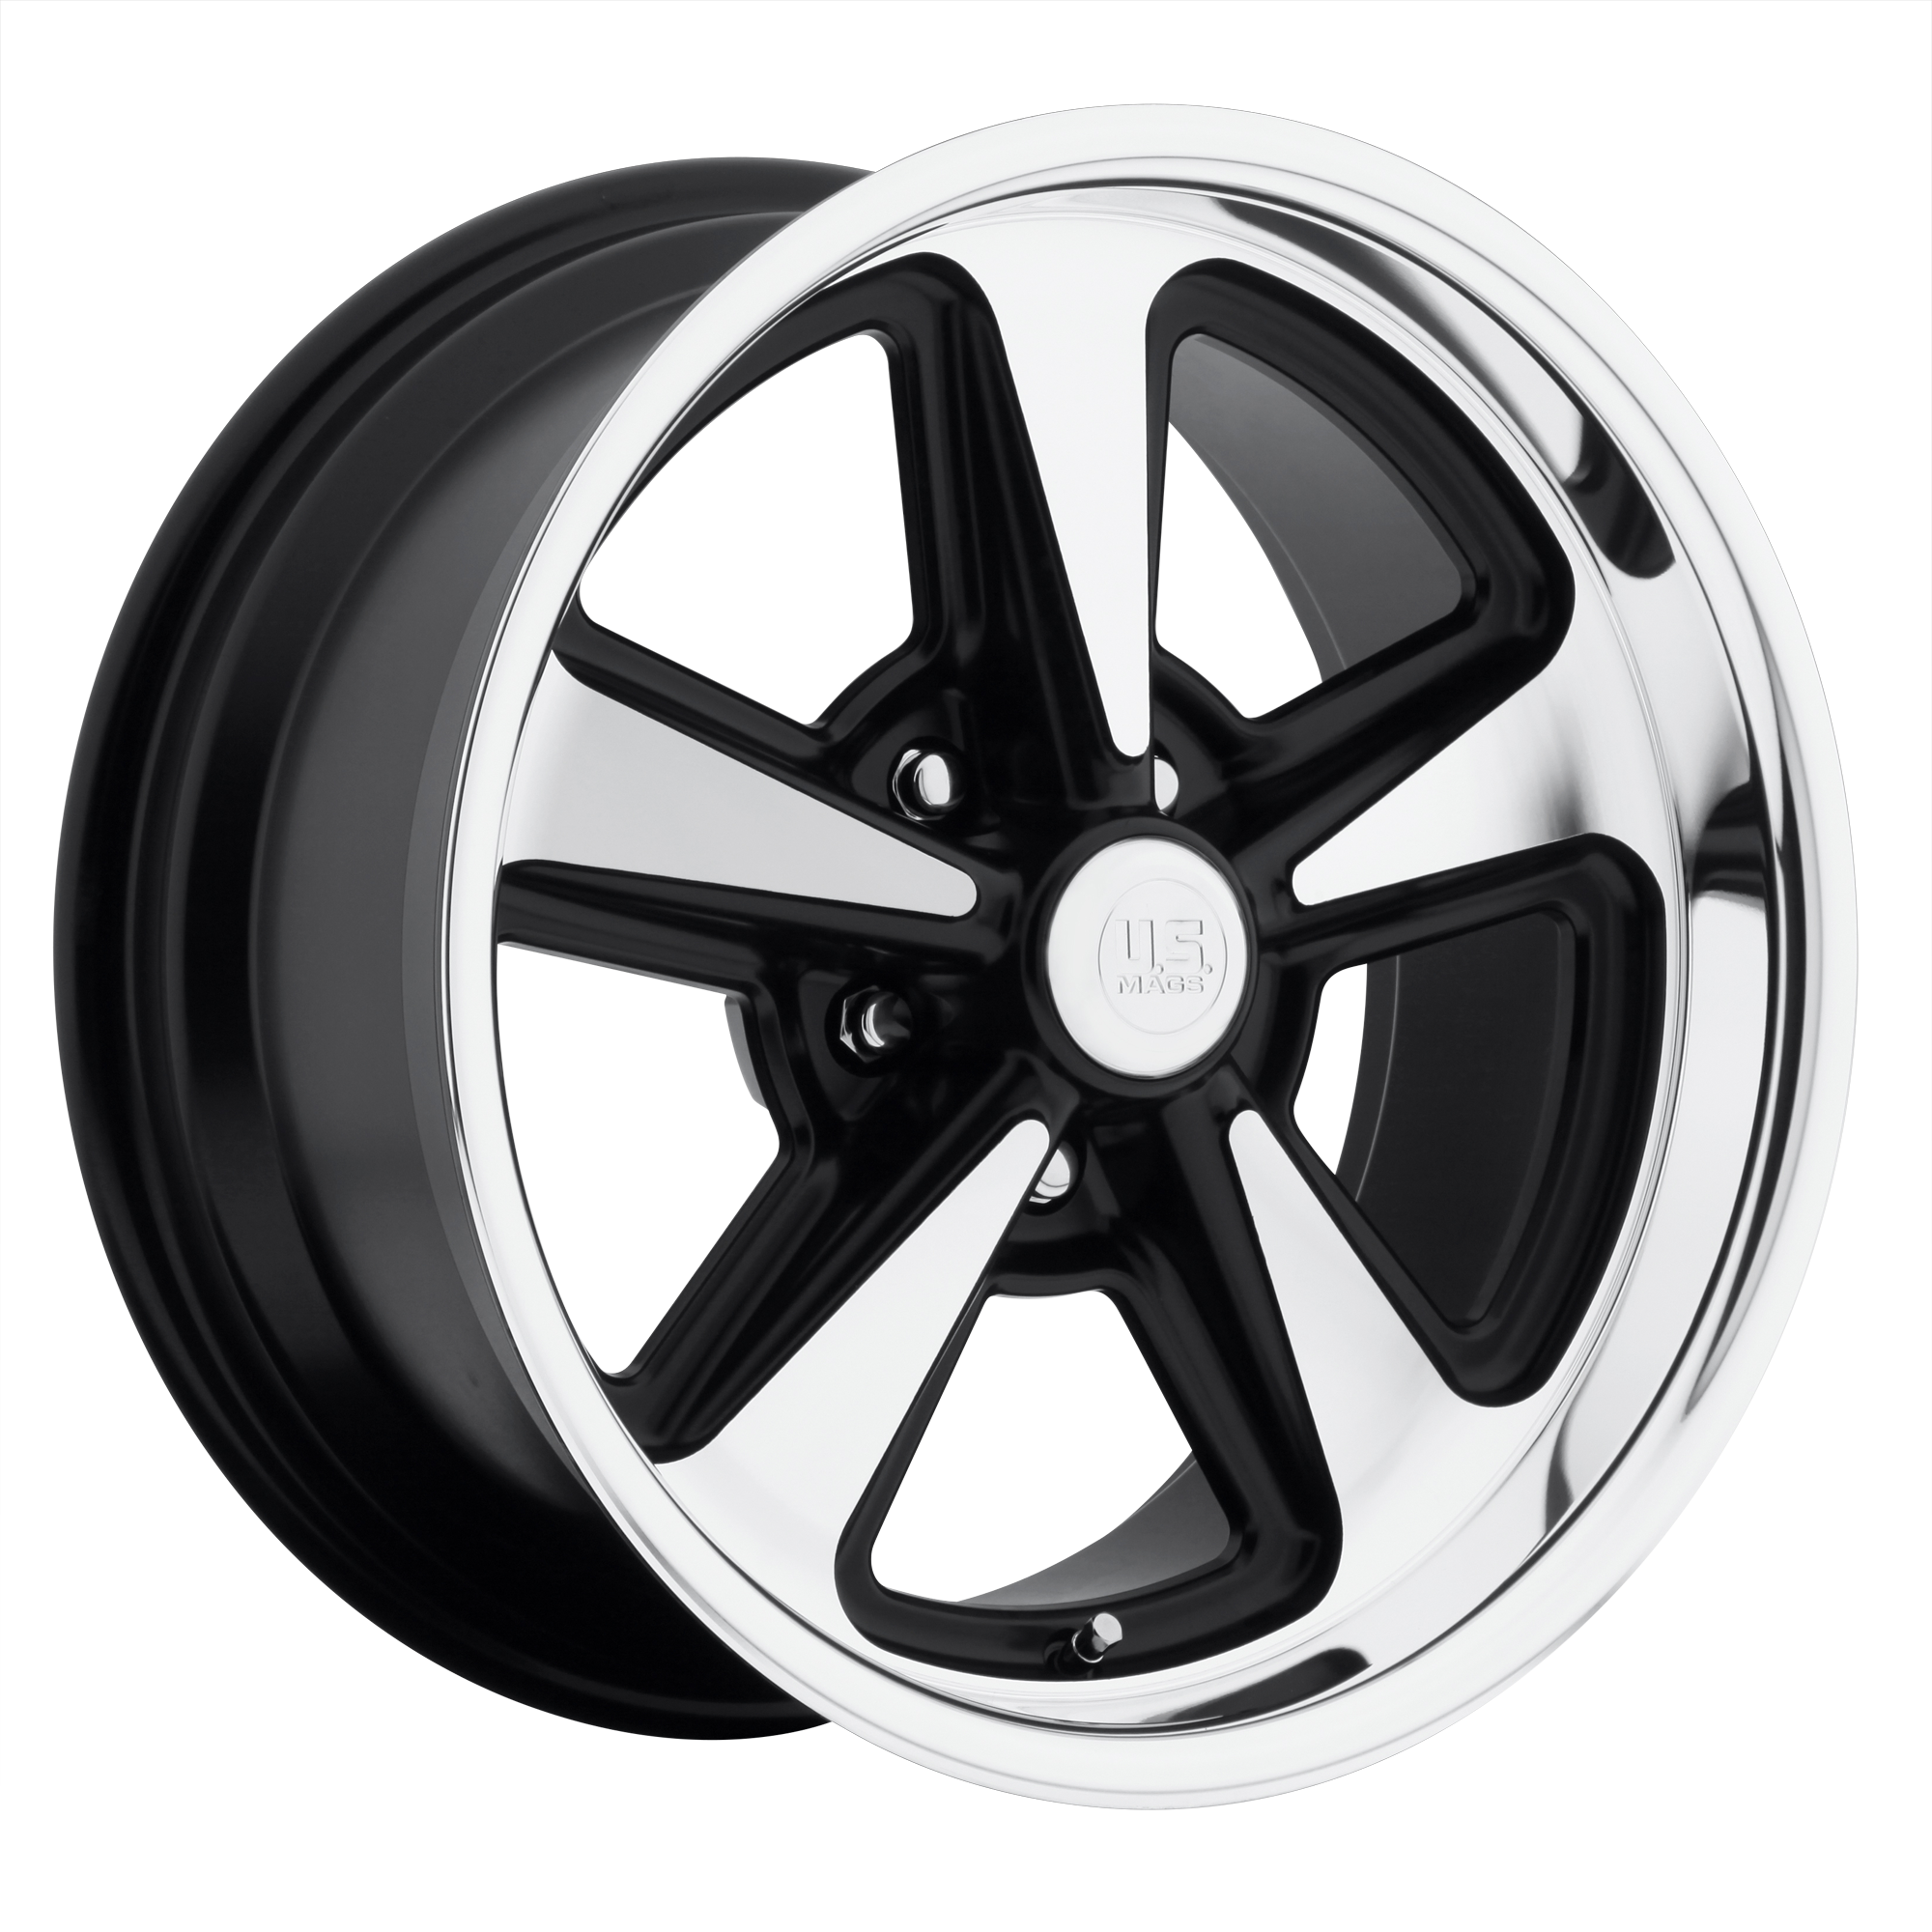 BANDIT 18x8 5x114.30 MATTE BLACK MACHINED (1 mm) - Tires and Engine Performance